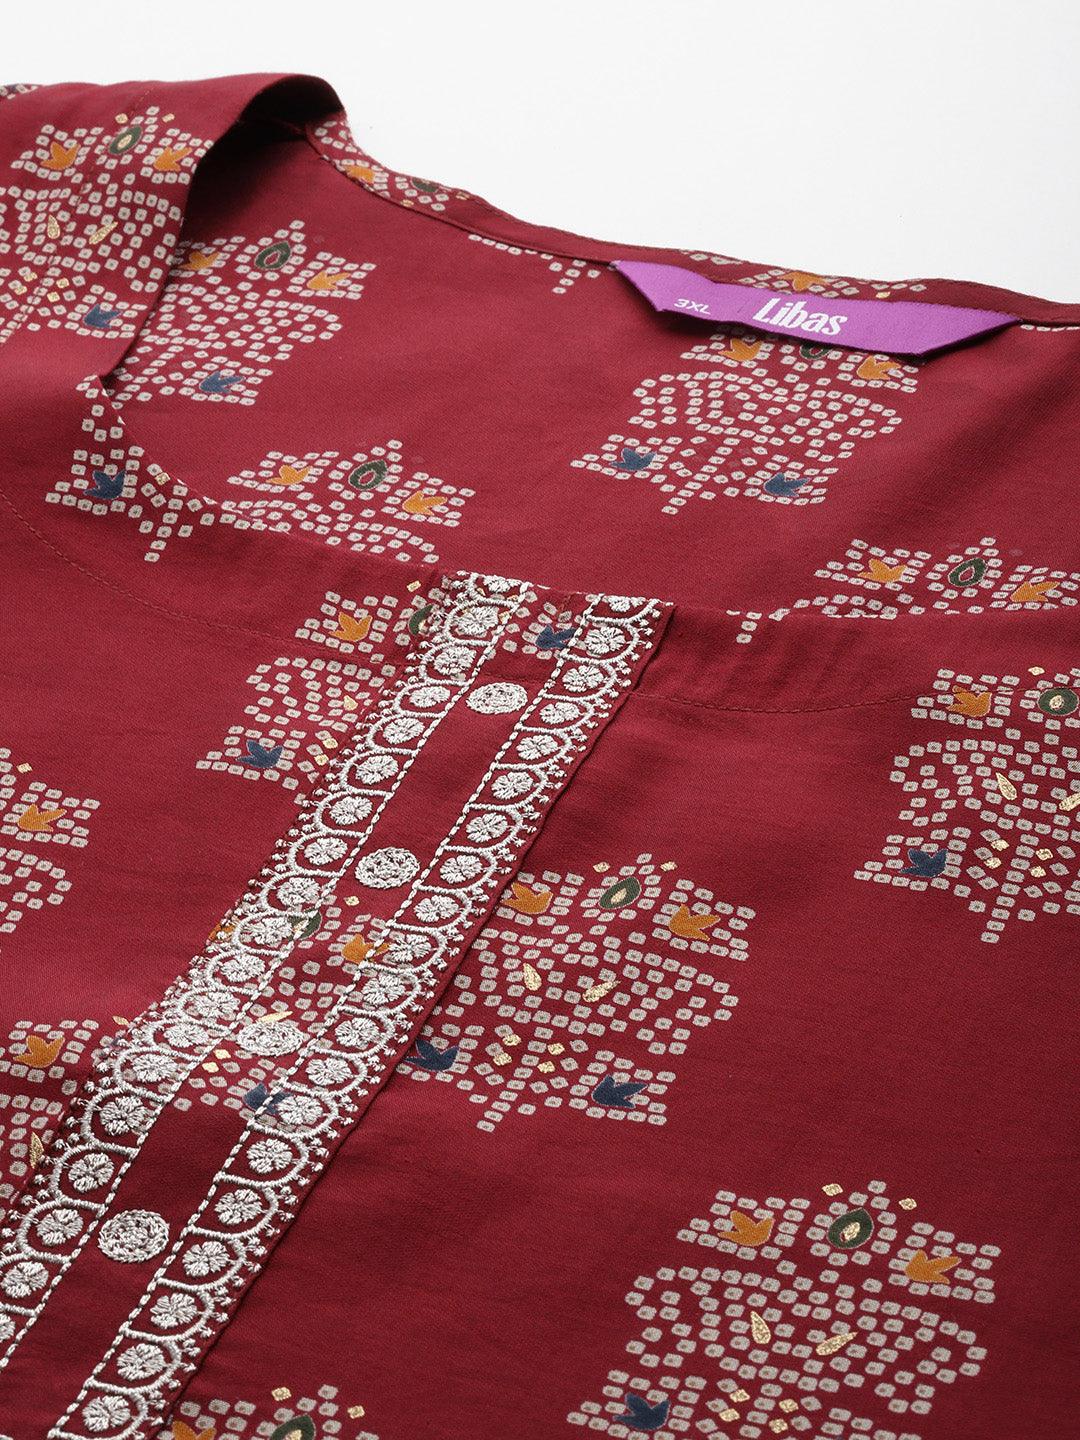 Plus Size Red Printed Silk Blend Straight Suit With Dupatta